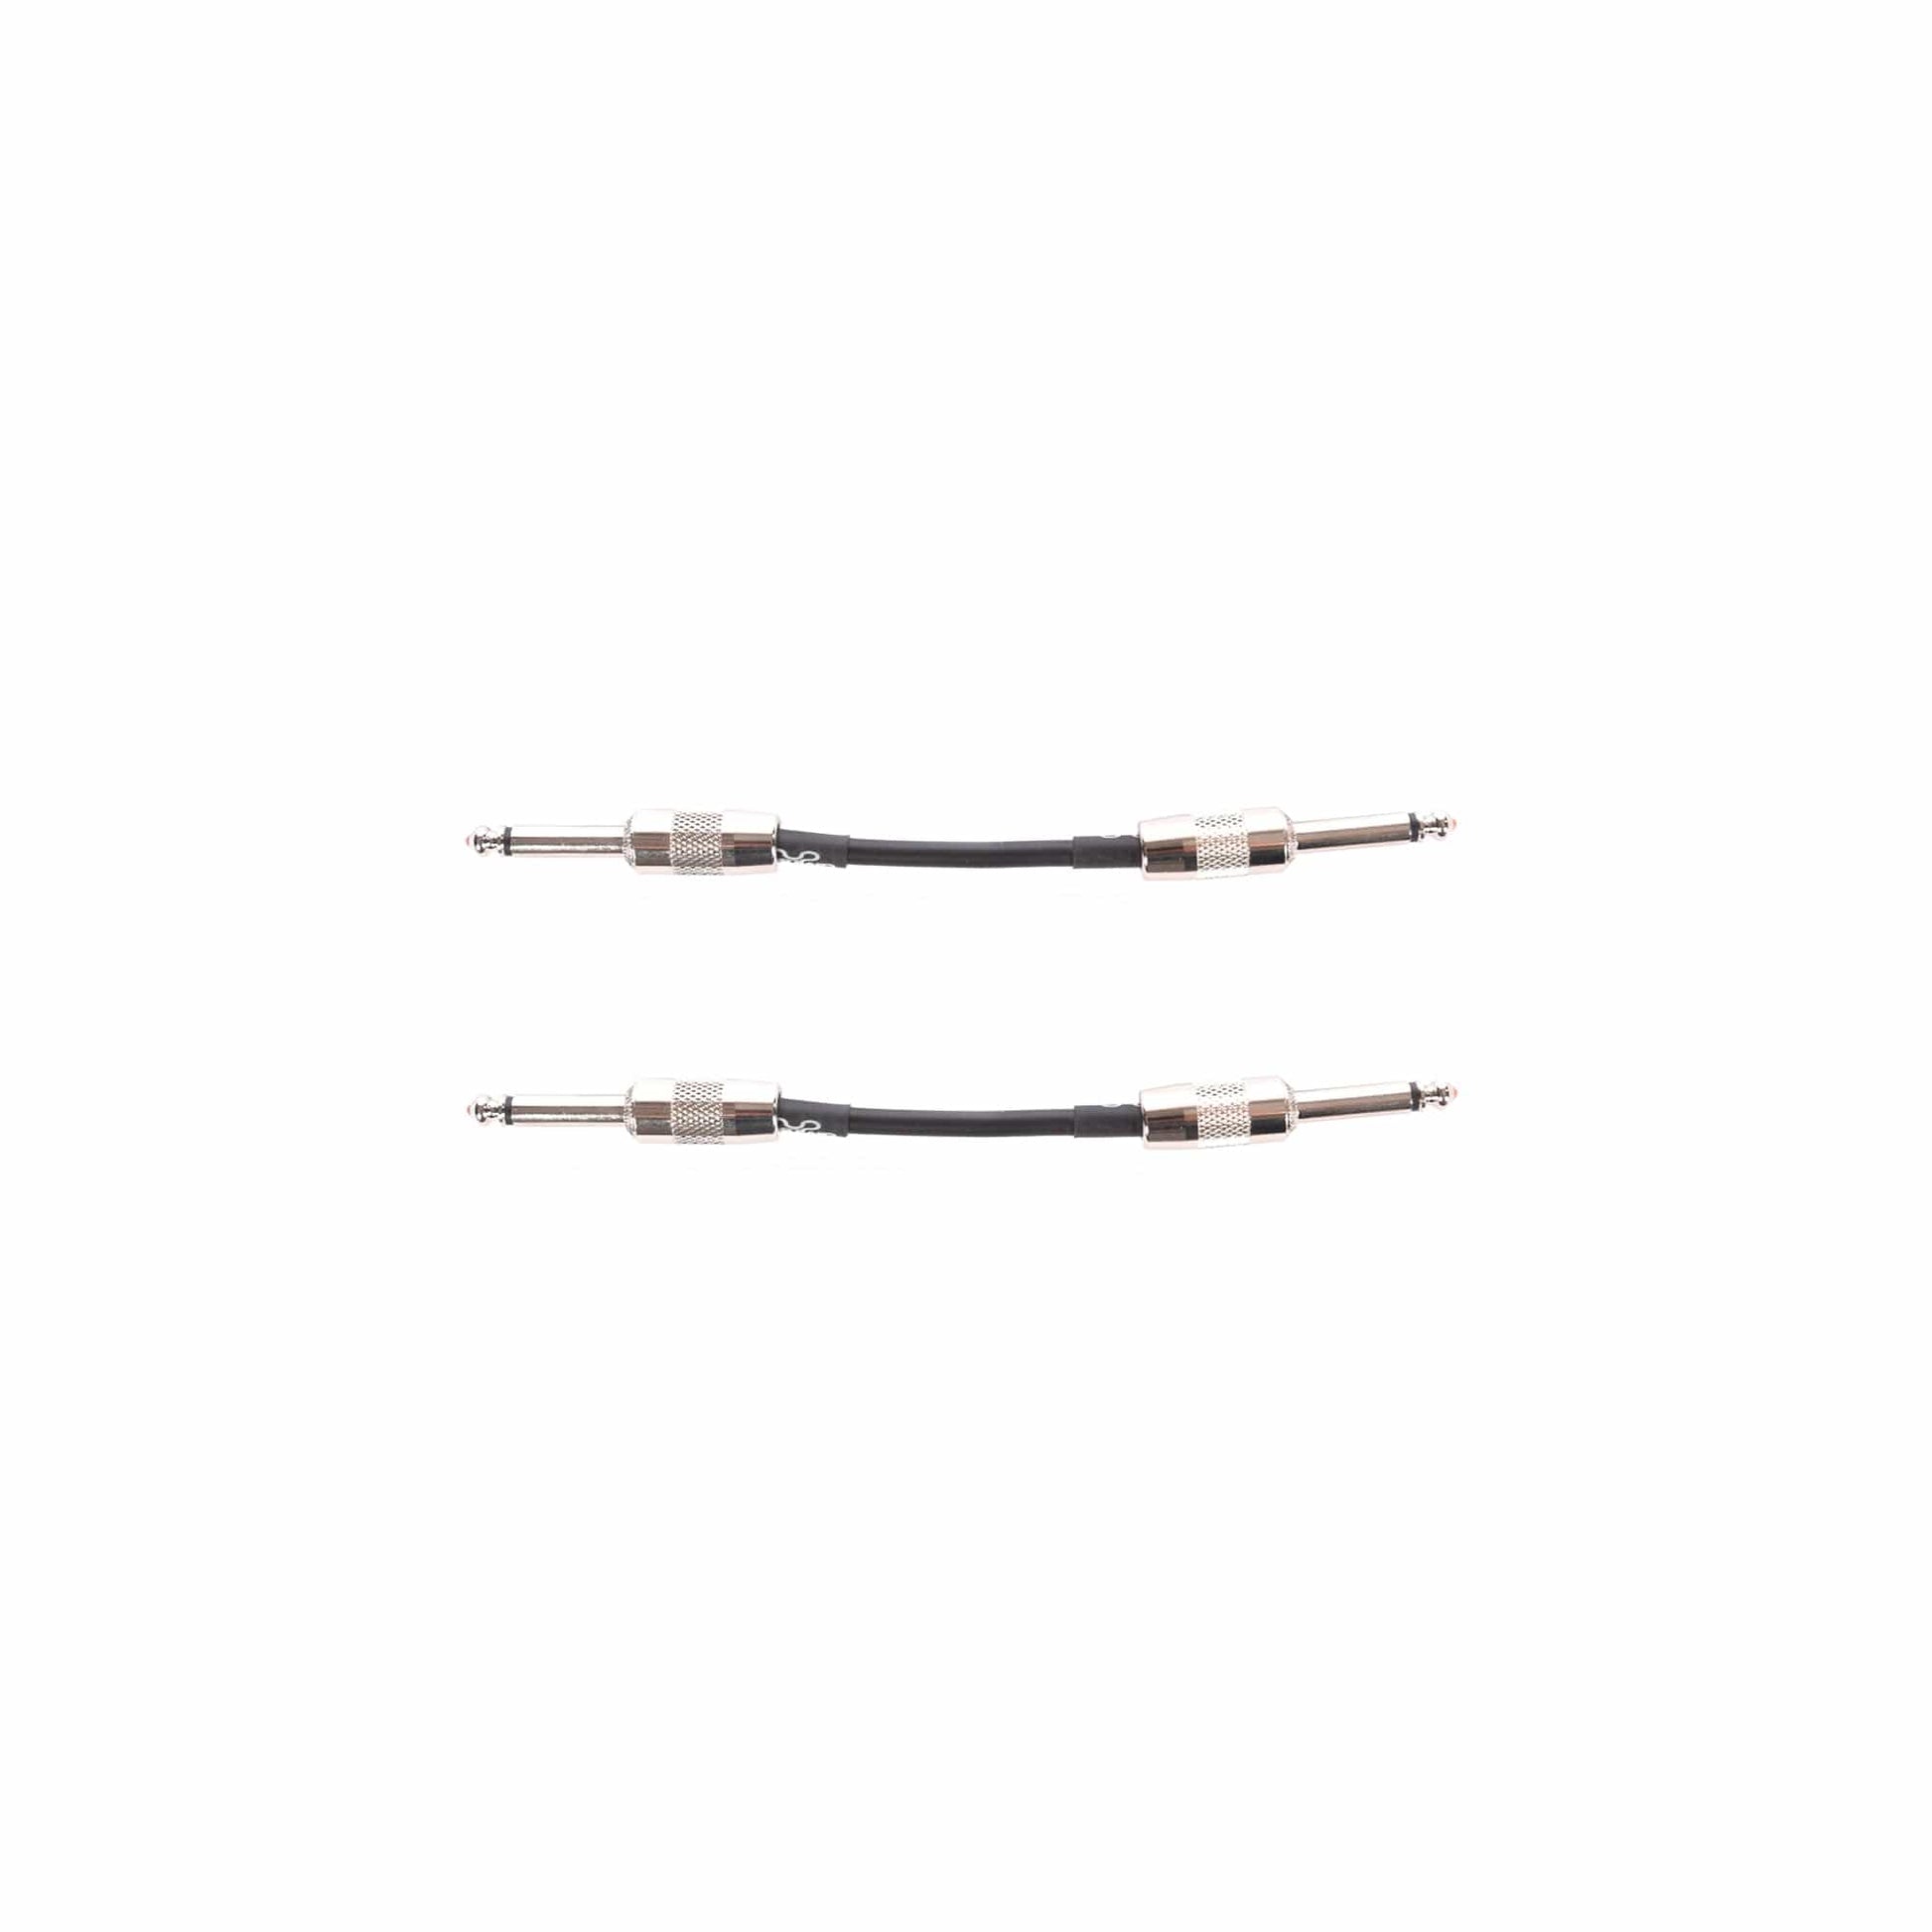 Divine Noise Teenie Patch Cable Black 4" Stubby Straight-Stubby Straight 2 Pack Bundle Accessories / Cables